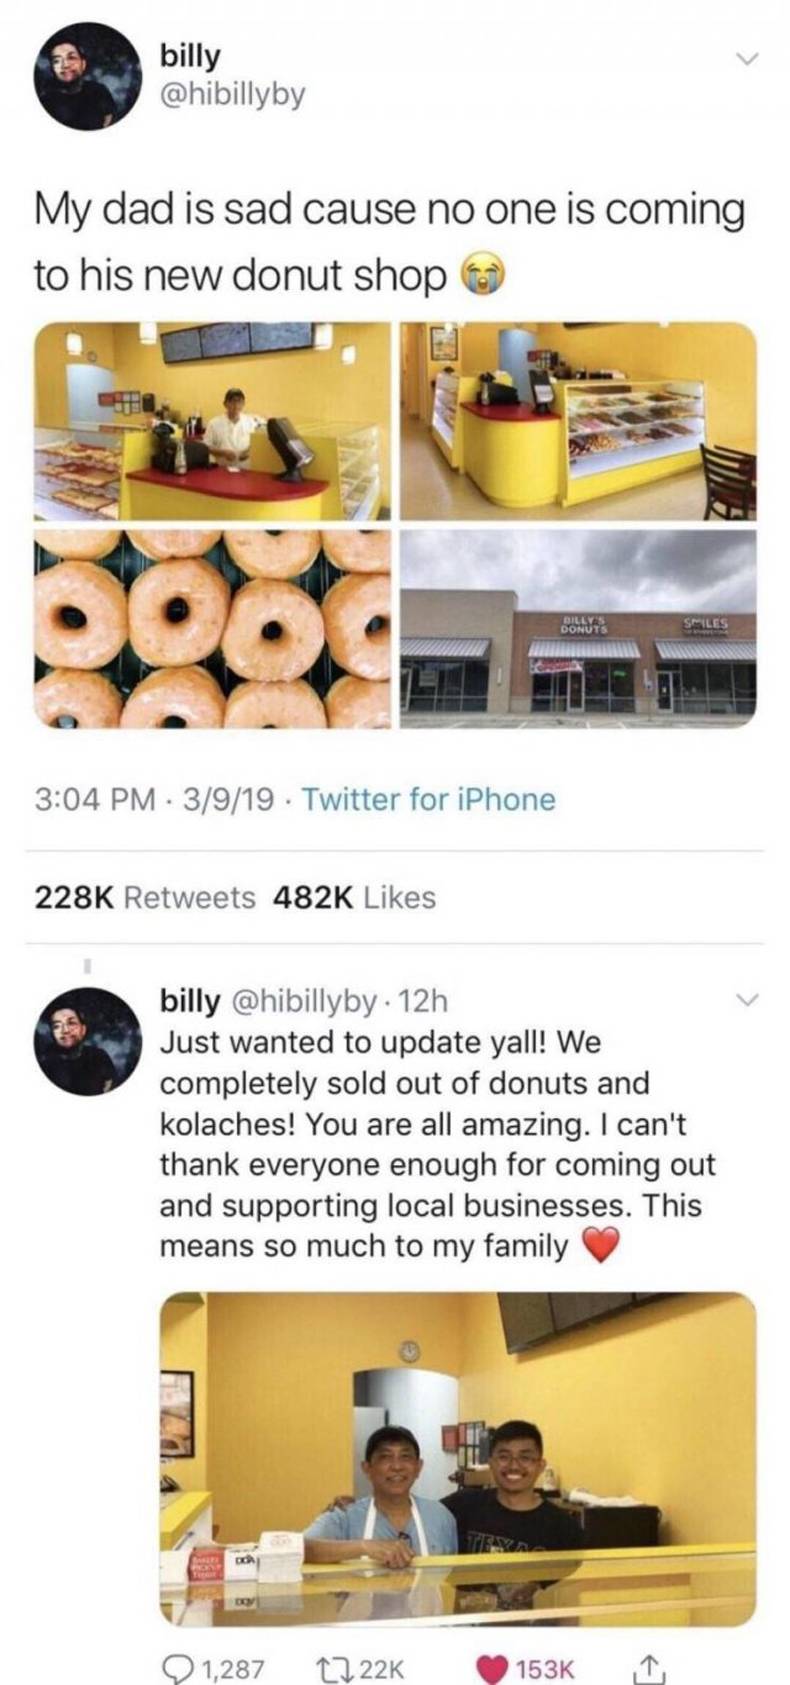 random pics - Olys billy My dad is sad cause no one is coming to his new donut shop Smiles 3919. Twitter for iPhone billy . 12h Just wanted to update yall! We completely sold out of donuts and kolaches! You are all amazing. I can't thank everyone enough f